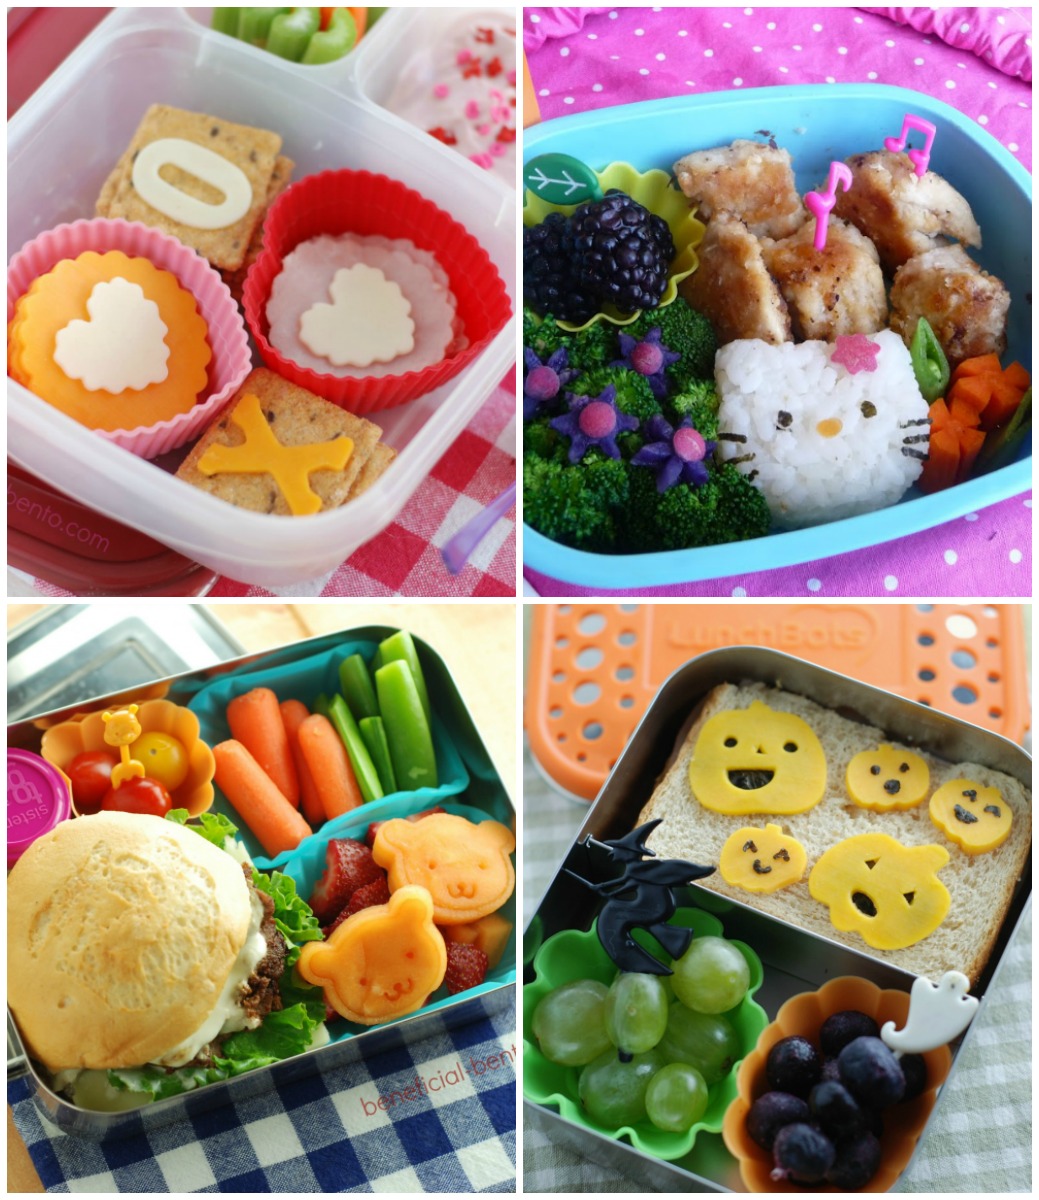 How to Make a Bento Box: Step-by-Step Instructions